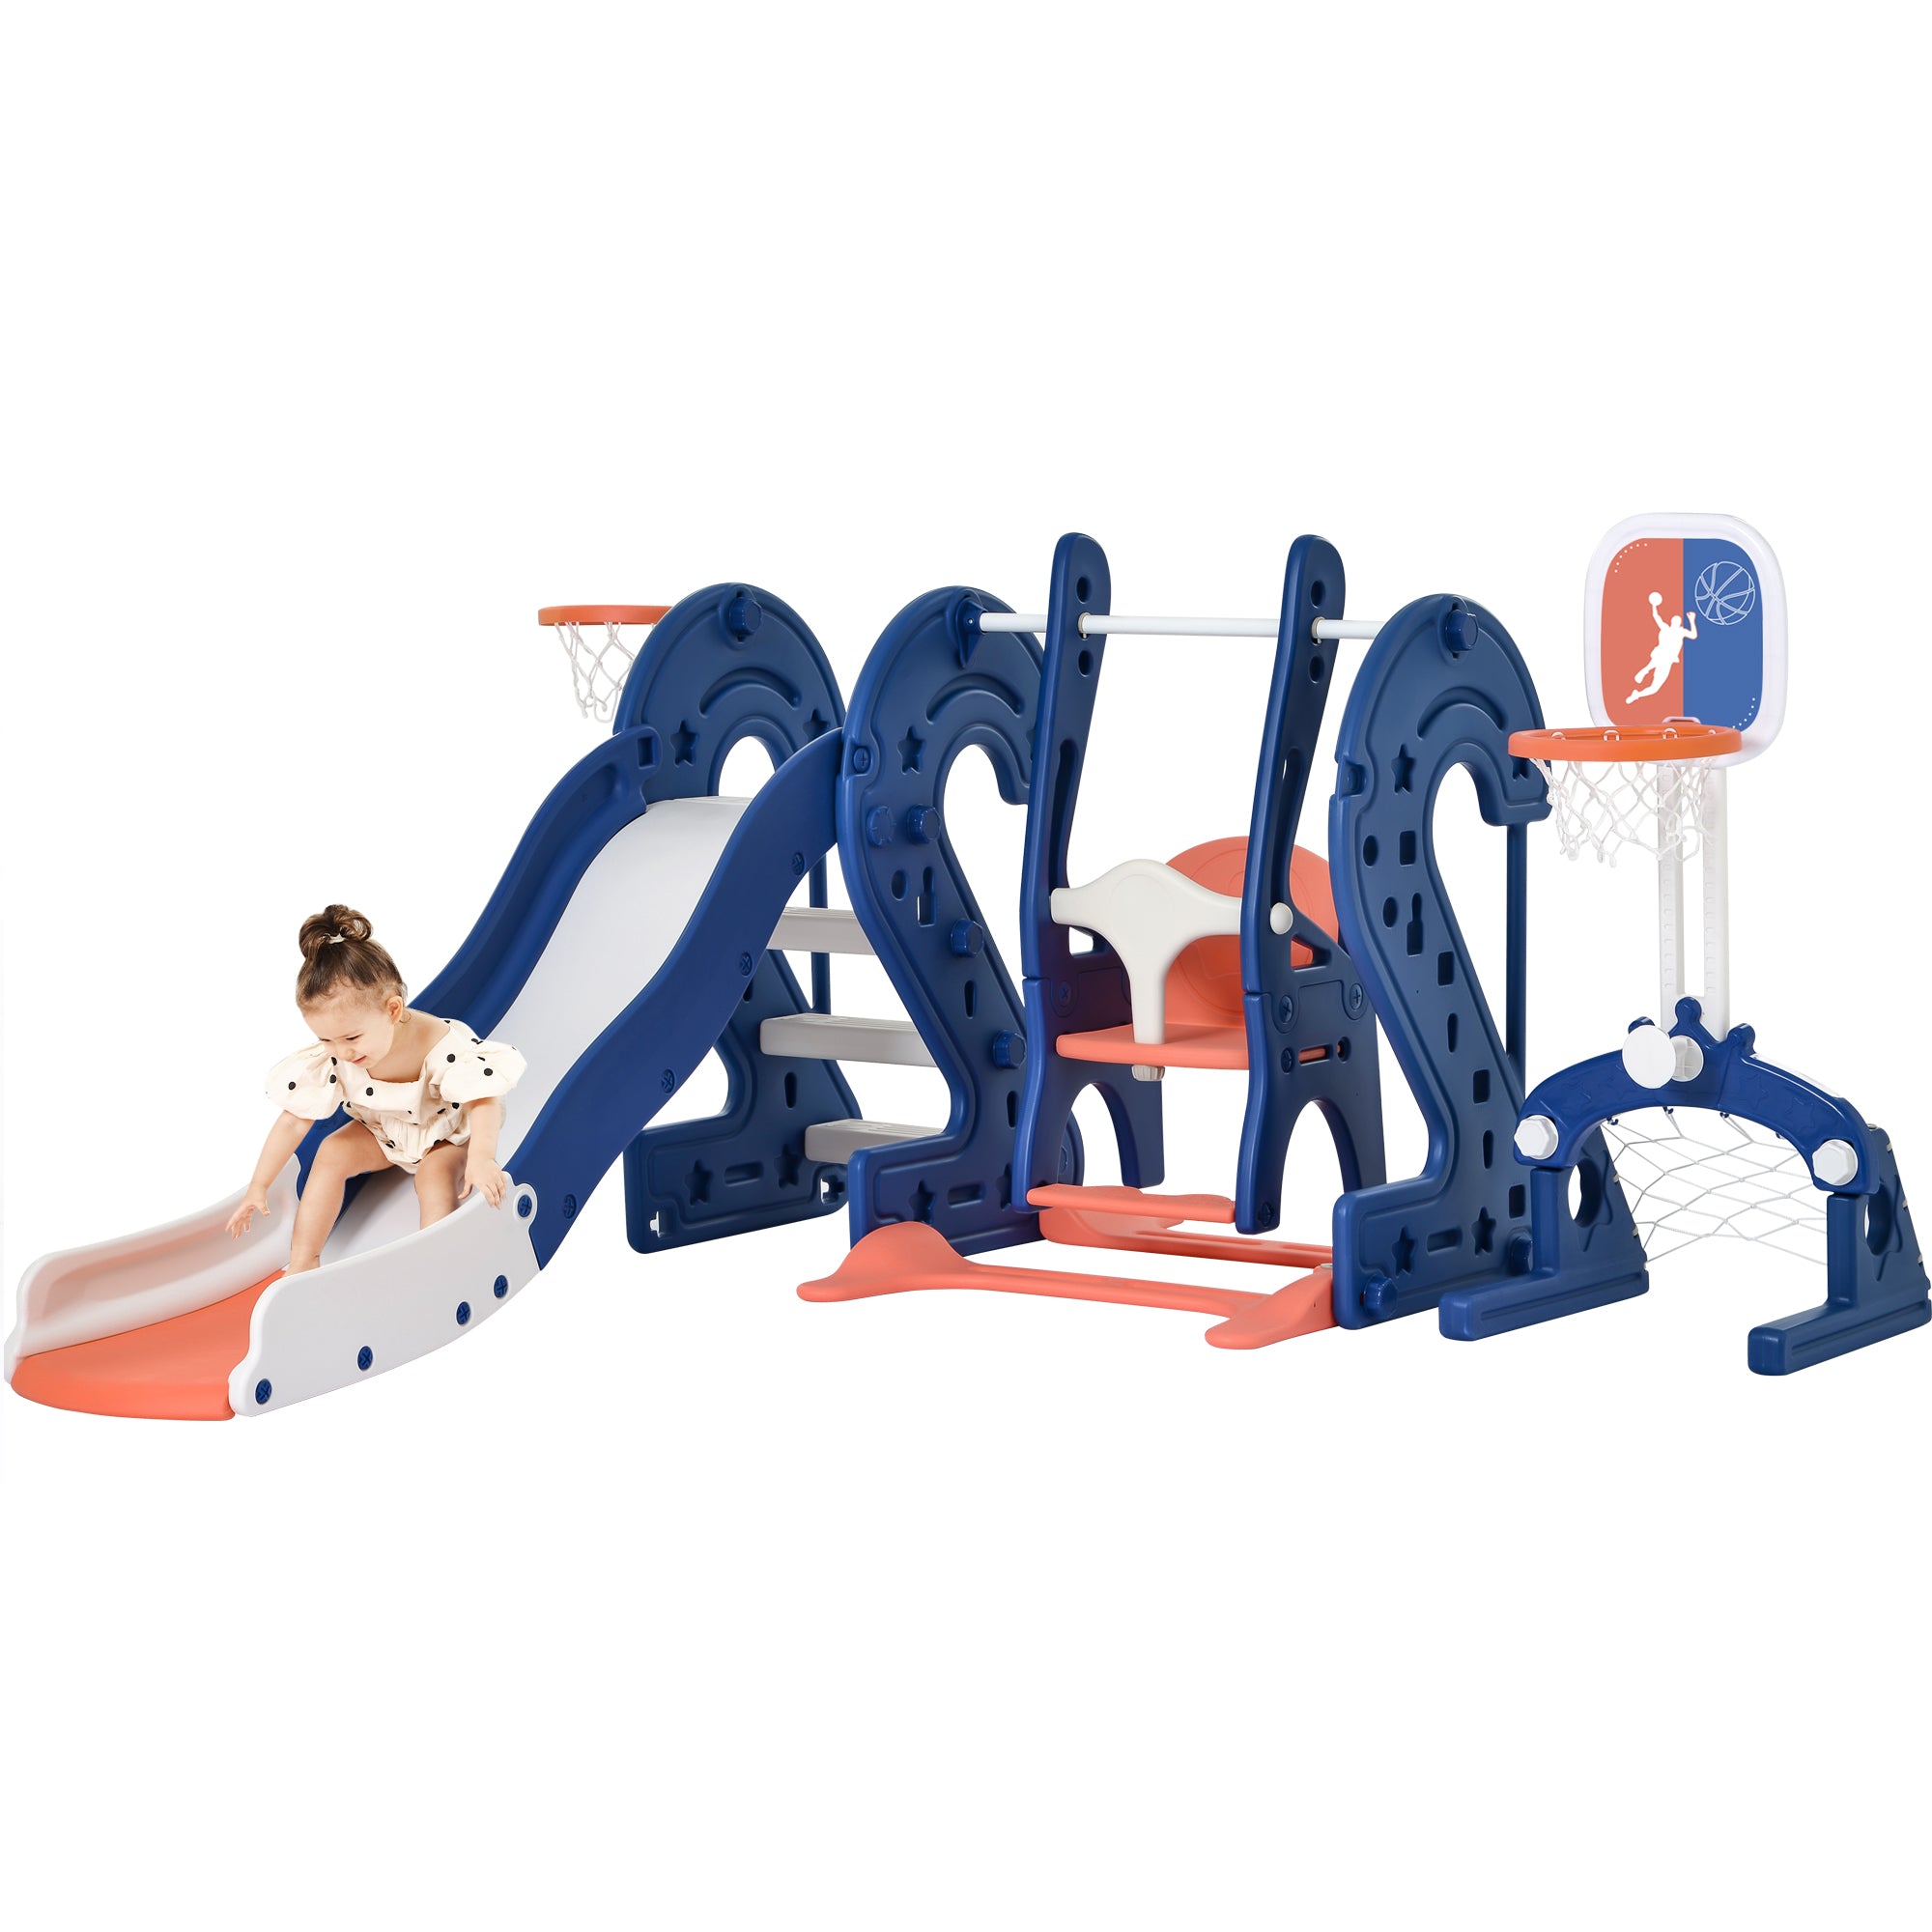 Toddler Slide and Swing Set 6 in 1 Kids Playground Climber Playset